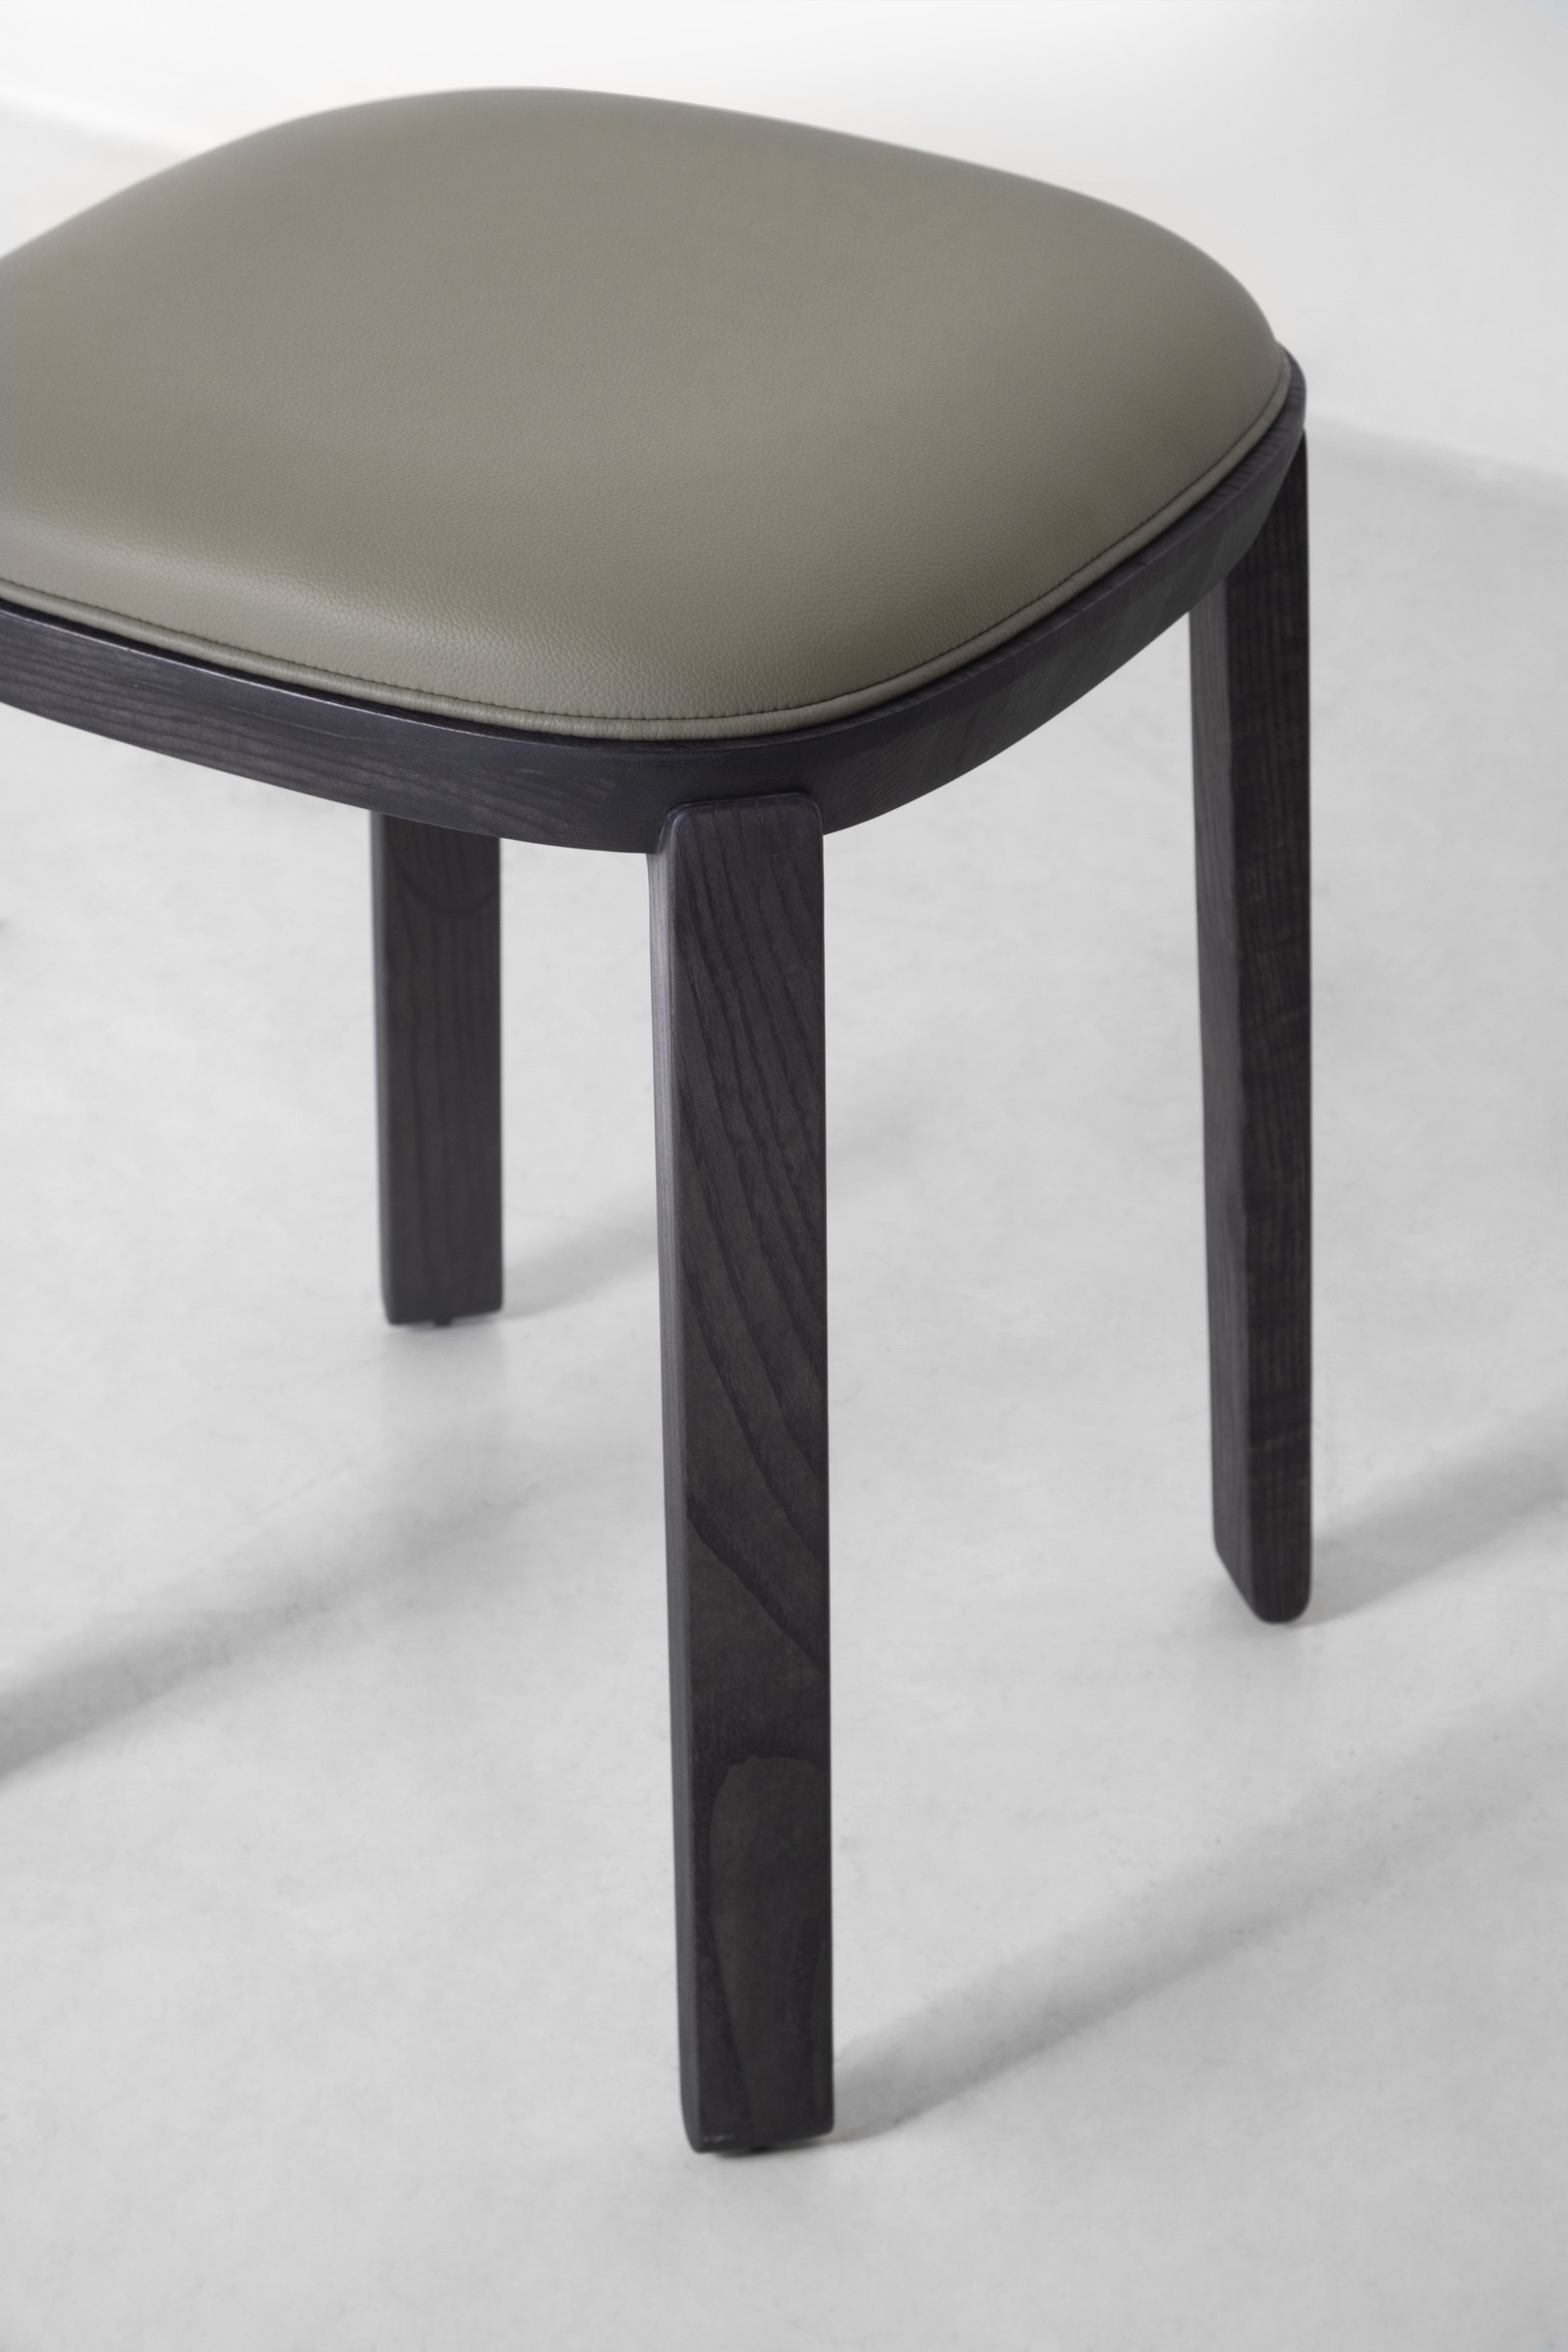 Collette Low Stool With Cushion